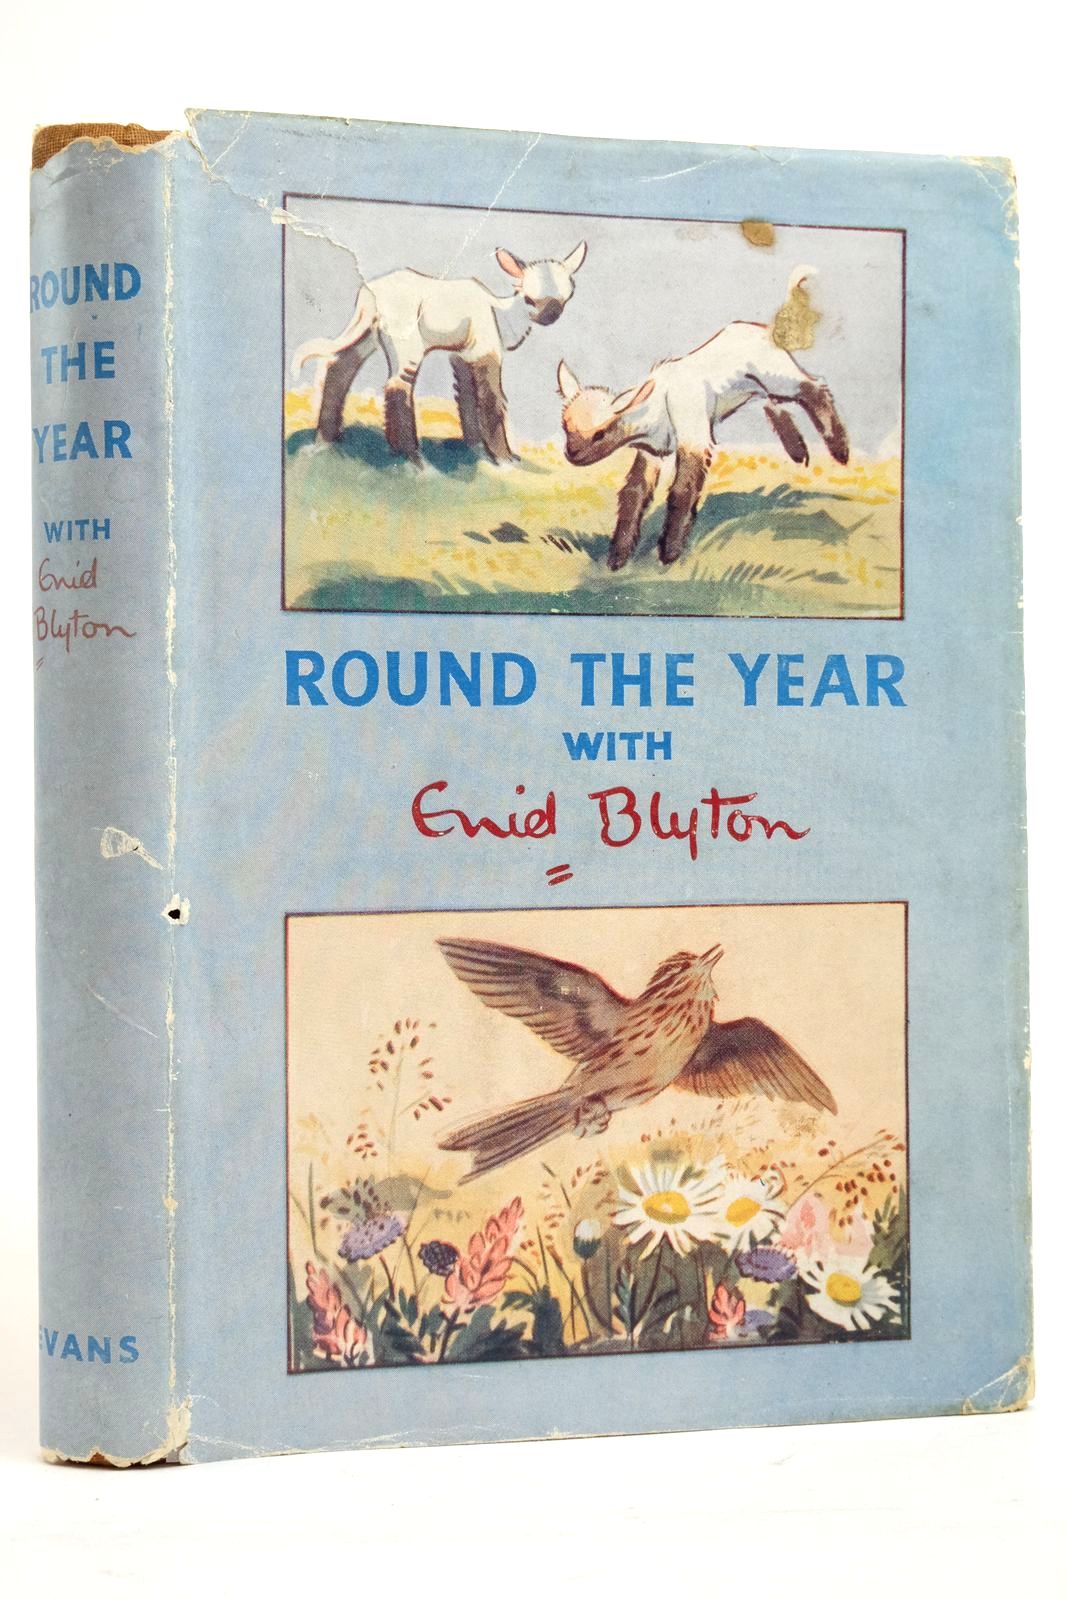 Photo of ROUND THE YEAR WITH ENID BLYTON written by Blyton, Enid published by Evans Brothers Limited (STOCK CODE: 2135999)  for sale by Stella & Rose's Books